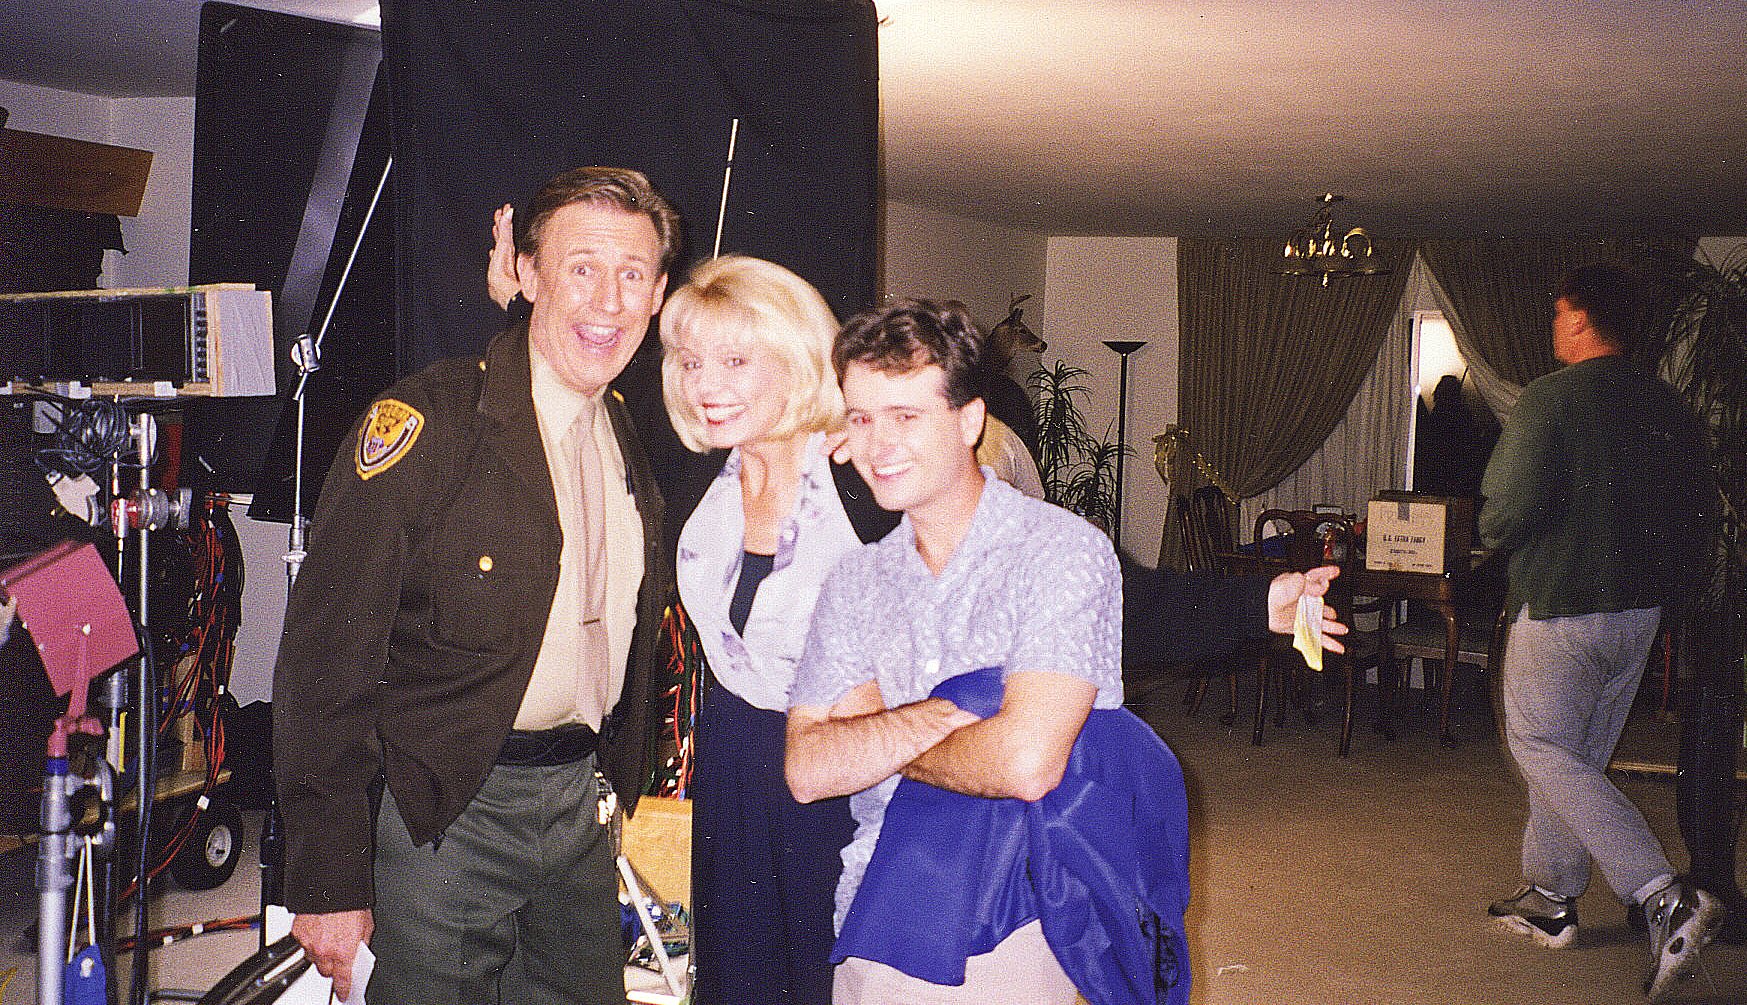 Behind the scenes with co- stars on feature film 